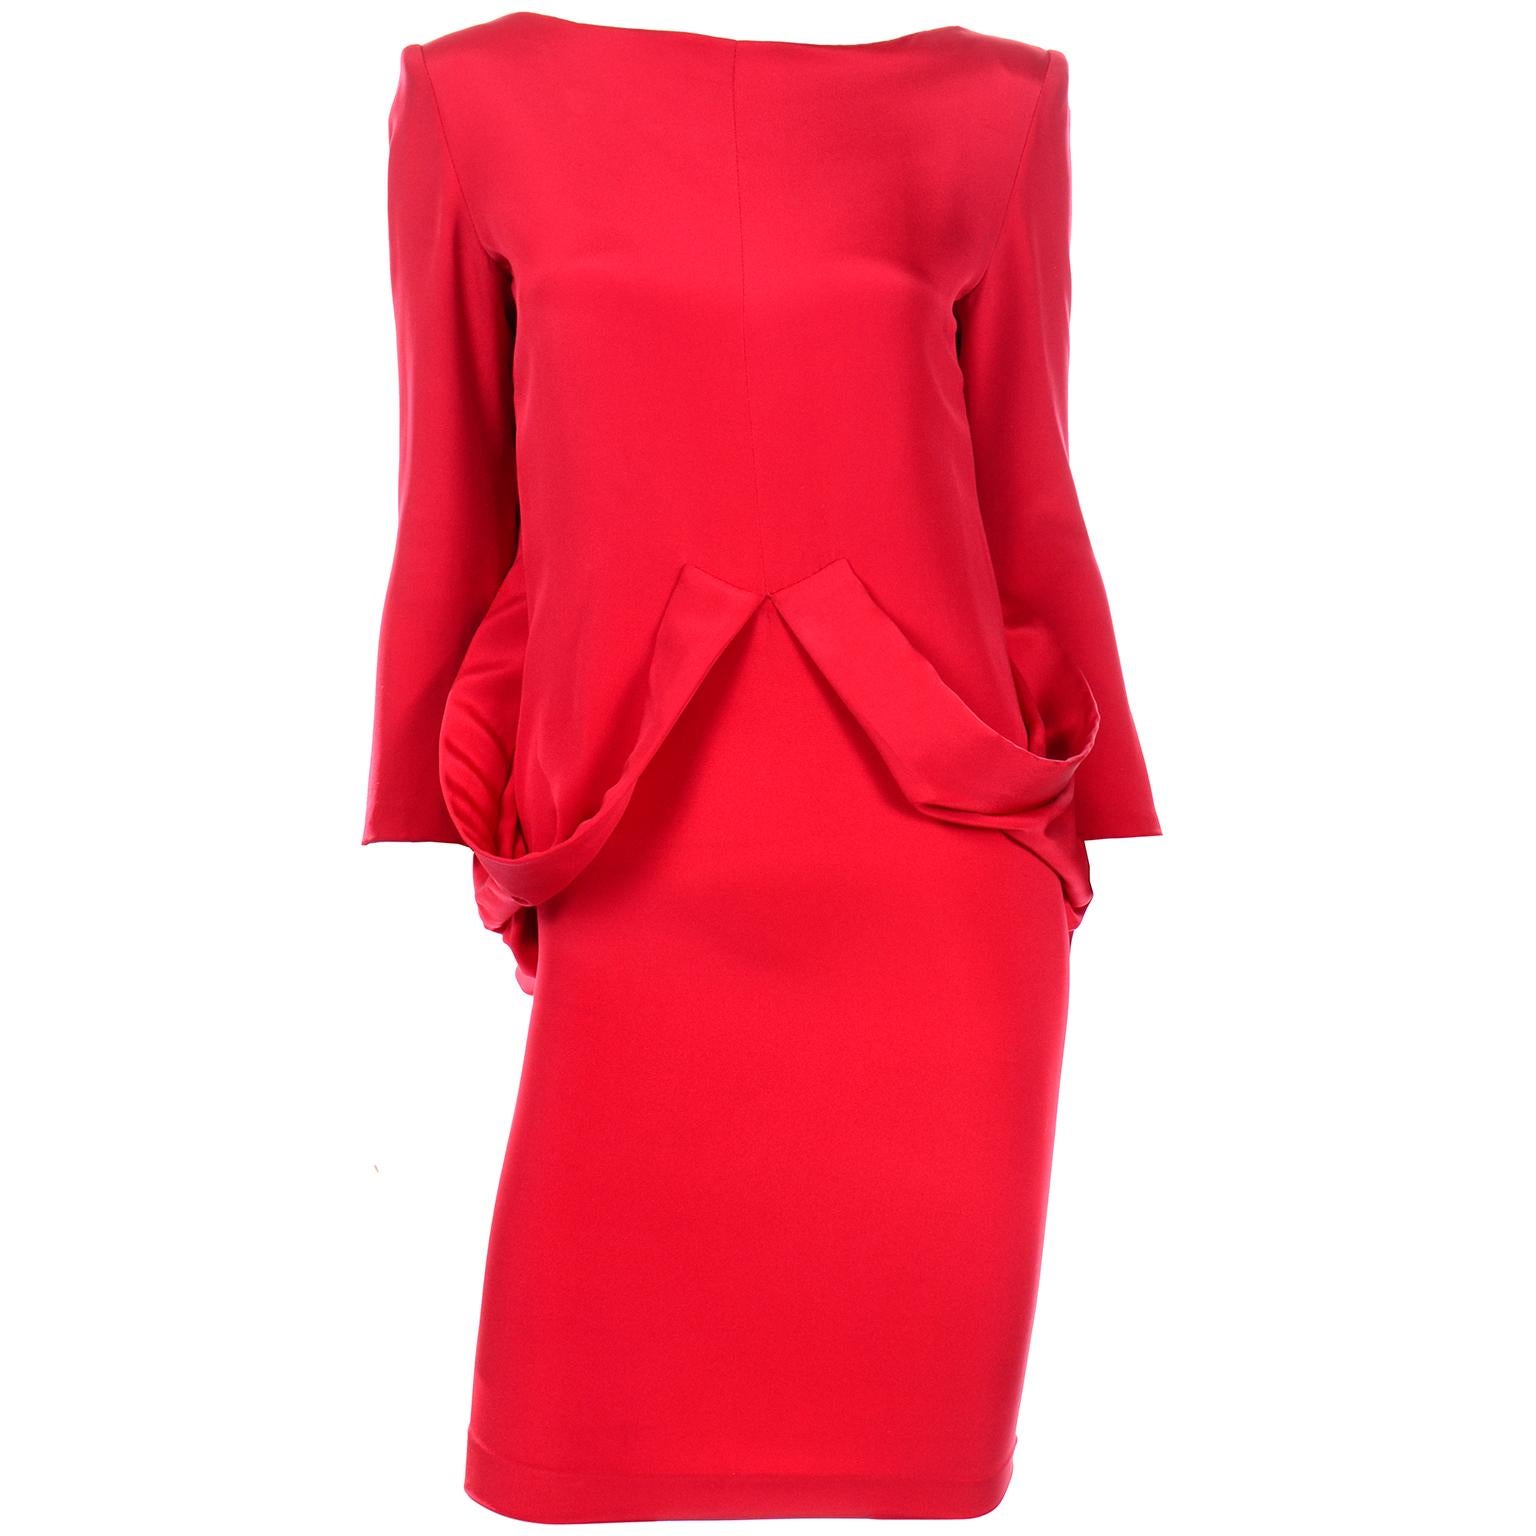 Pierre Cardin Vintage Red Silk Crepe Draped Evening Dress w Plunging Low Back For Sale 9